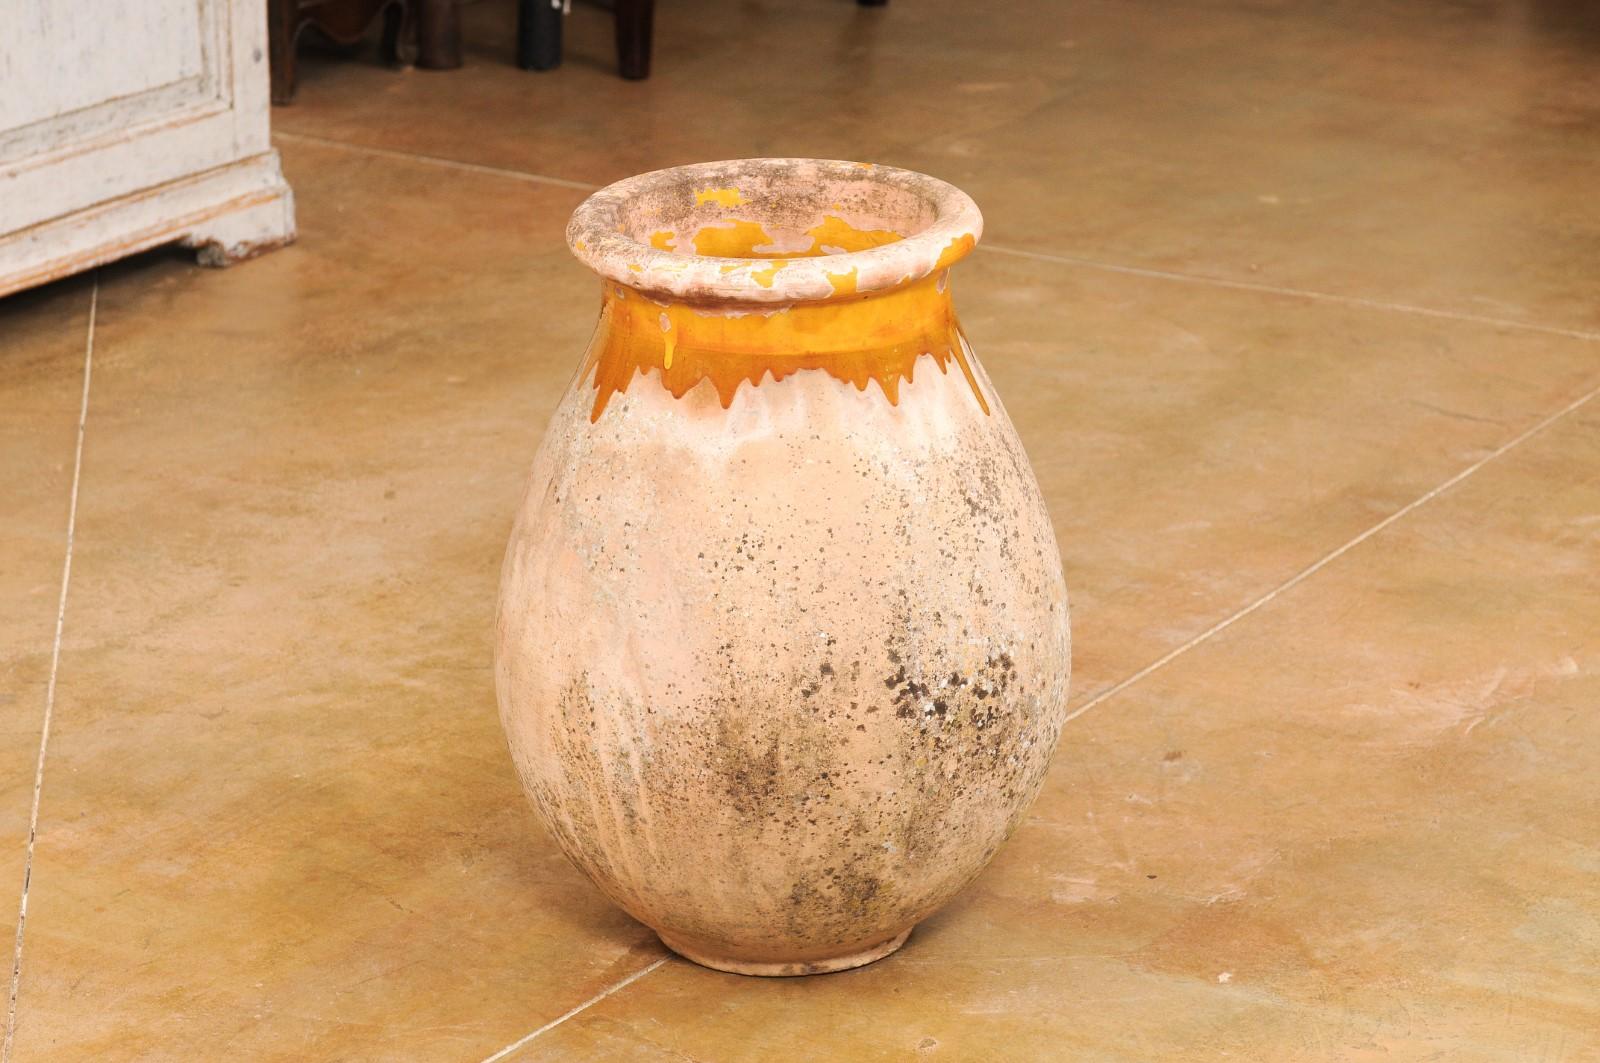 French 19th Century Biot Pottery Jar with Yellow Glaze and Dripping Effect For Sale 4